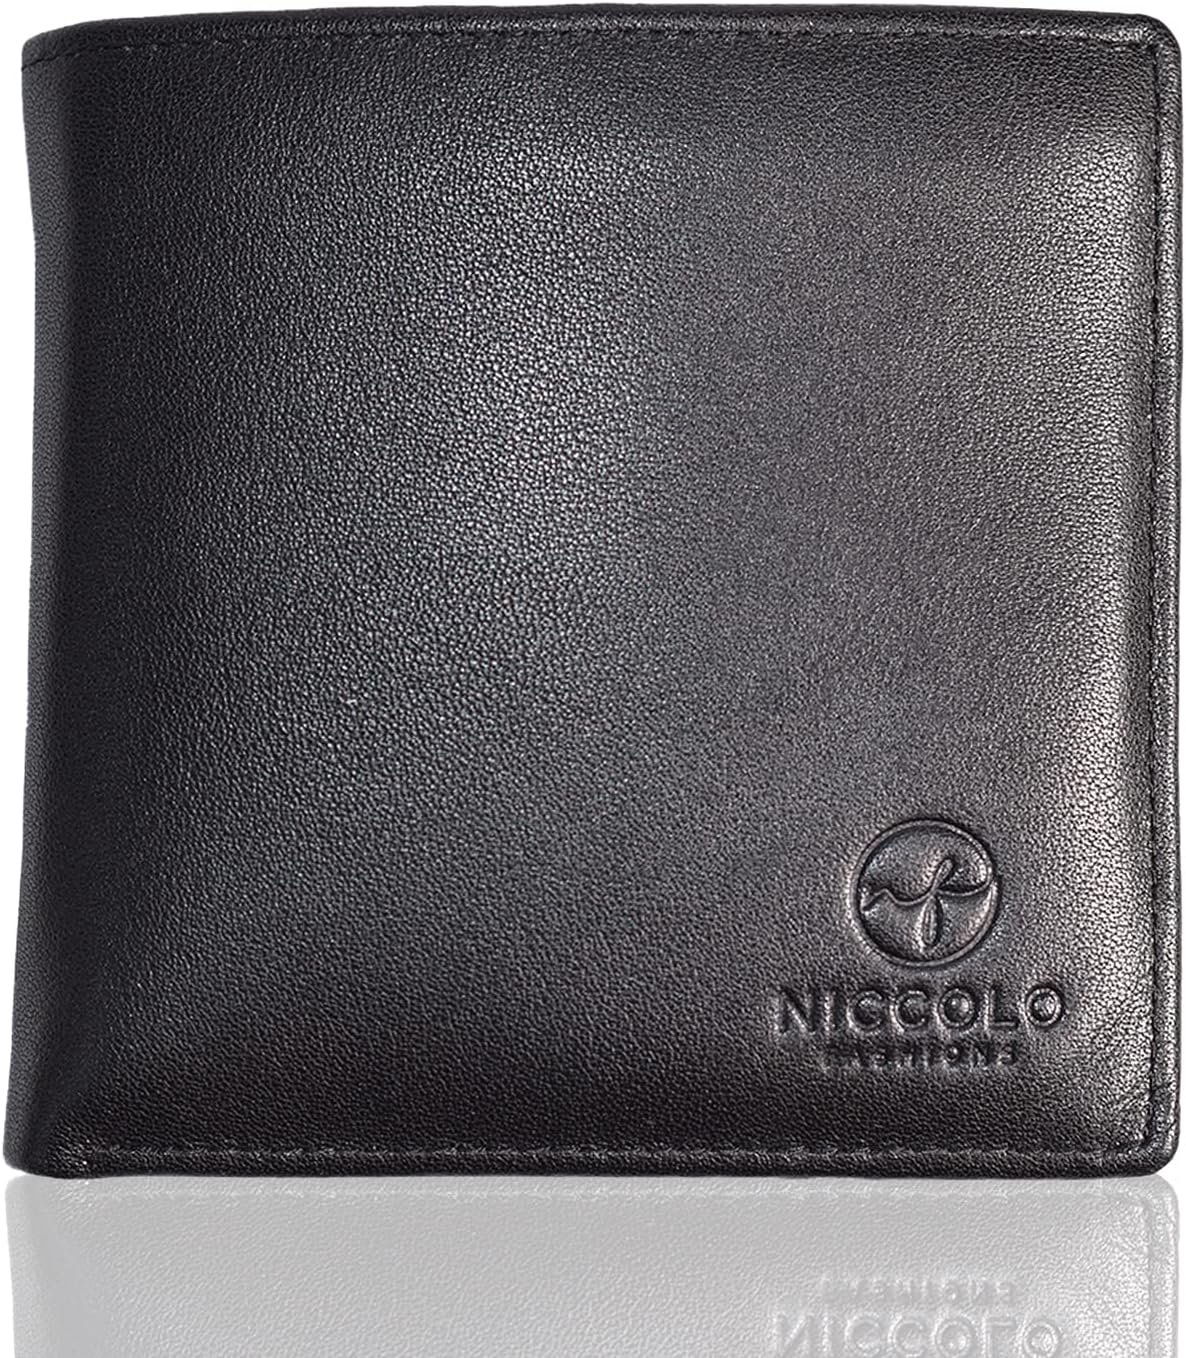 Top-Grain Leather Wallet for Men Review